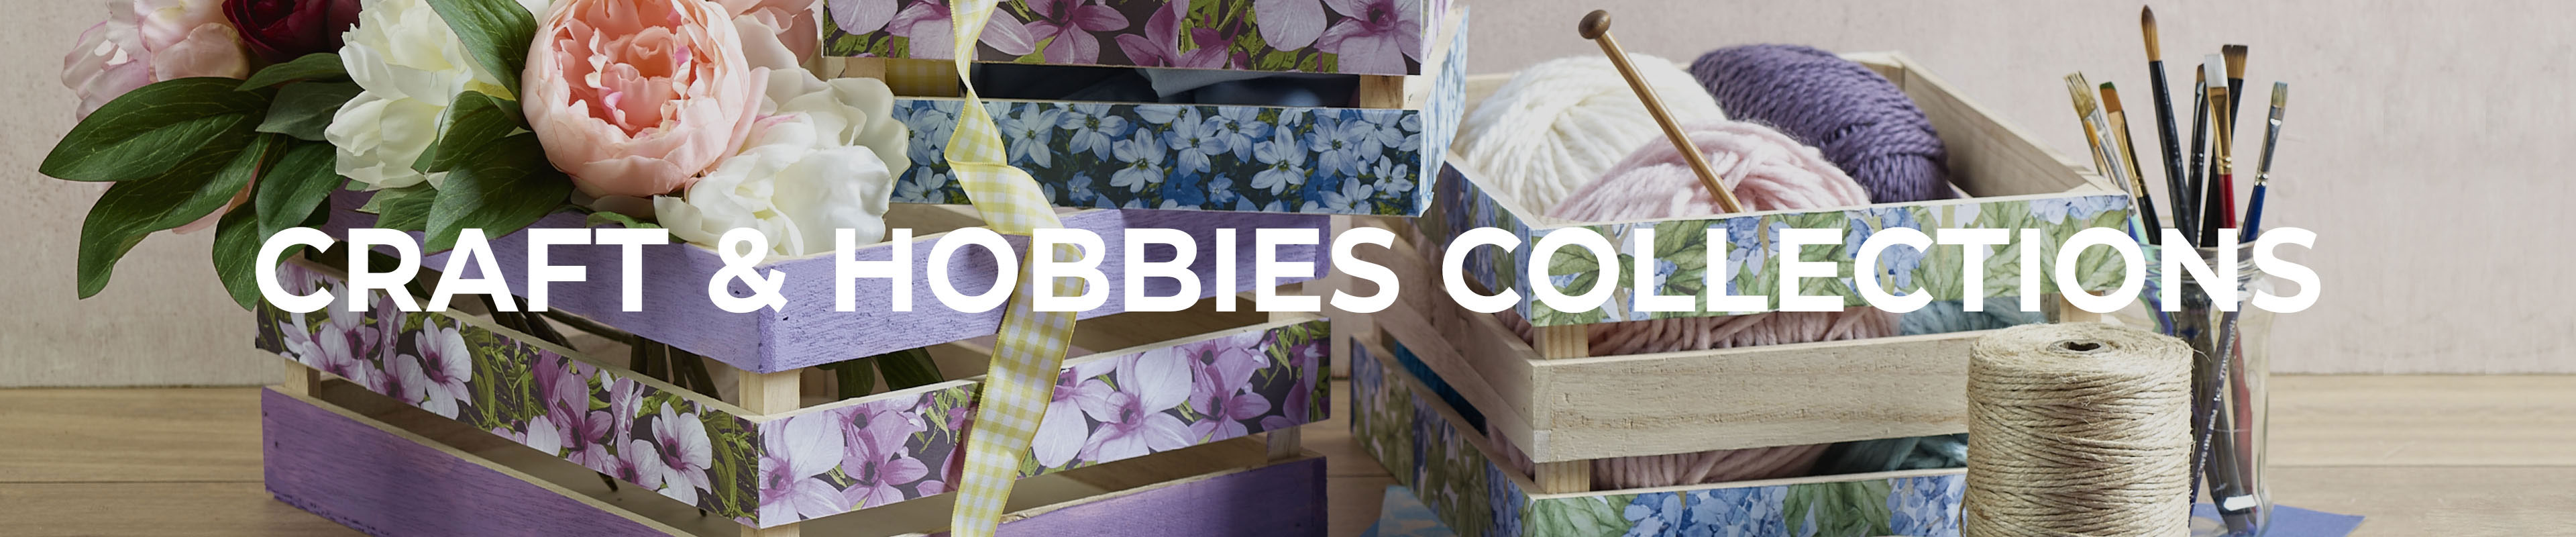 Shop Our Craft & Hobbies Collections